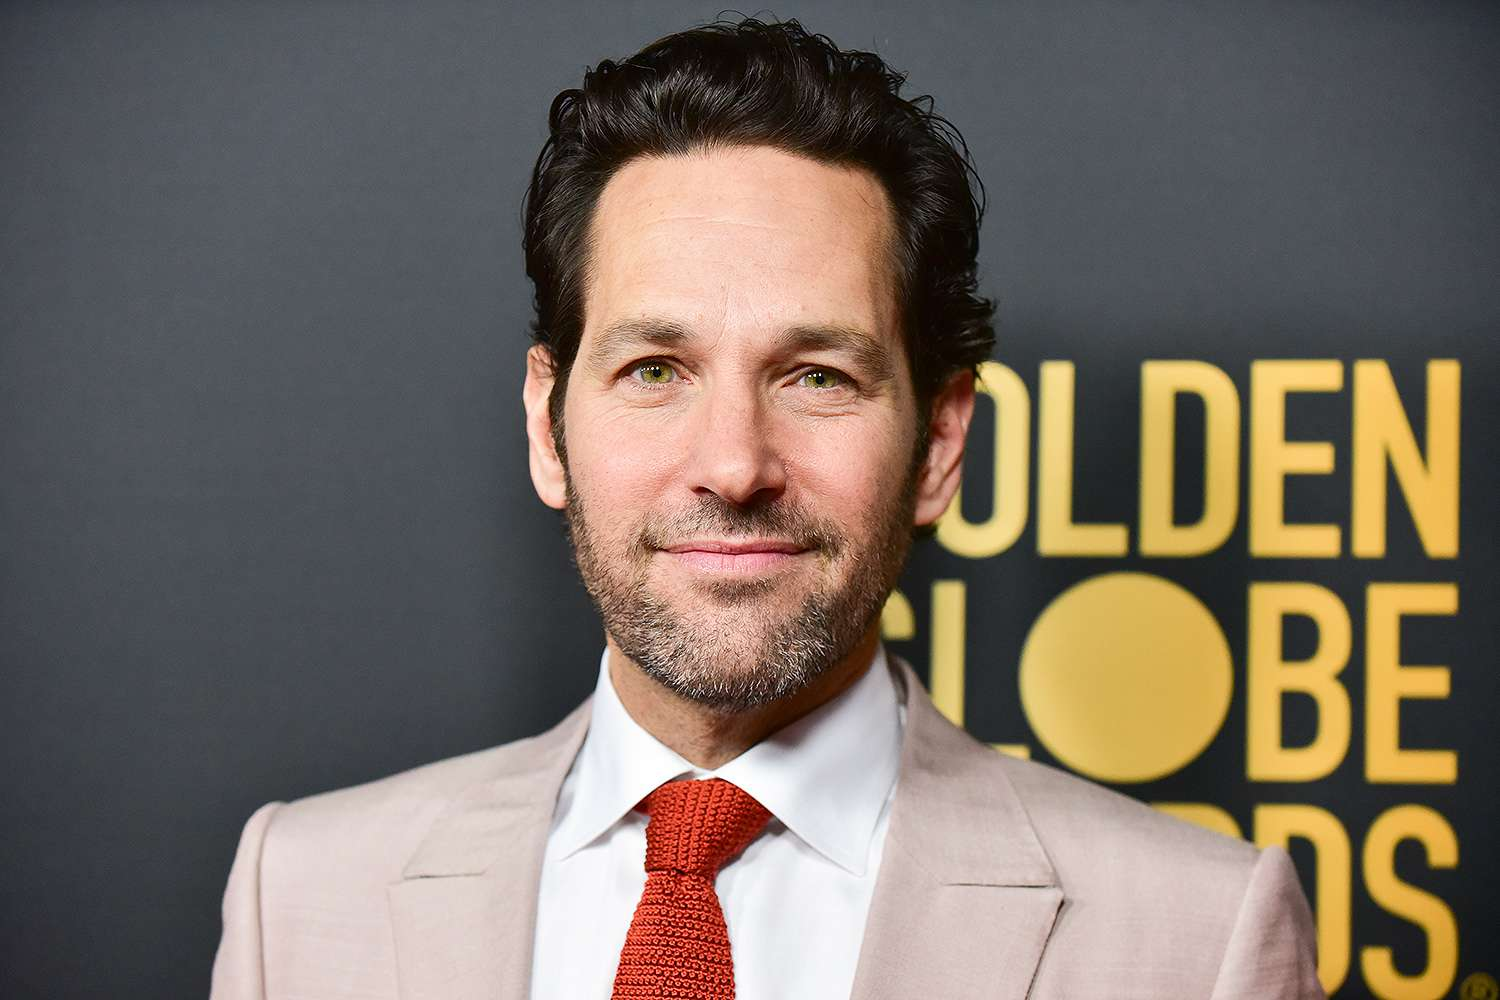 Paul Rudd Biography: Age, Net Worth, Parents, Siblings, Height, Instagram, Movies, Awards, Spouse